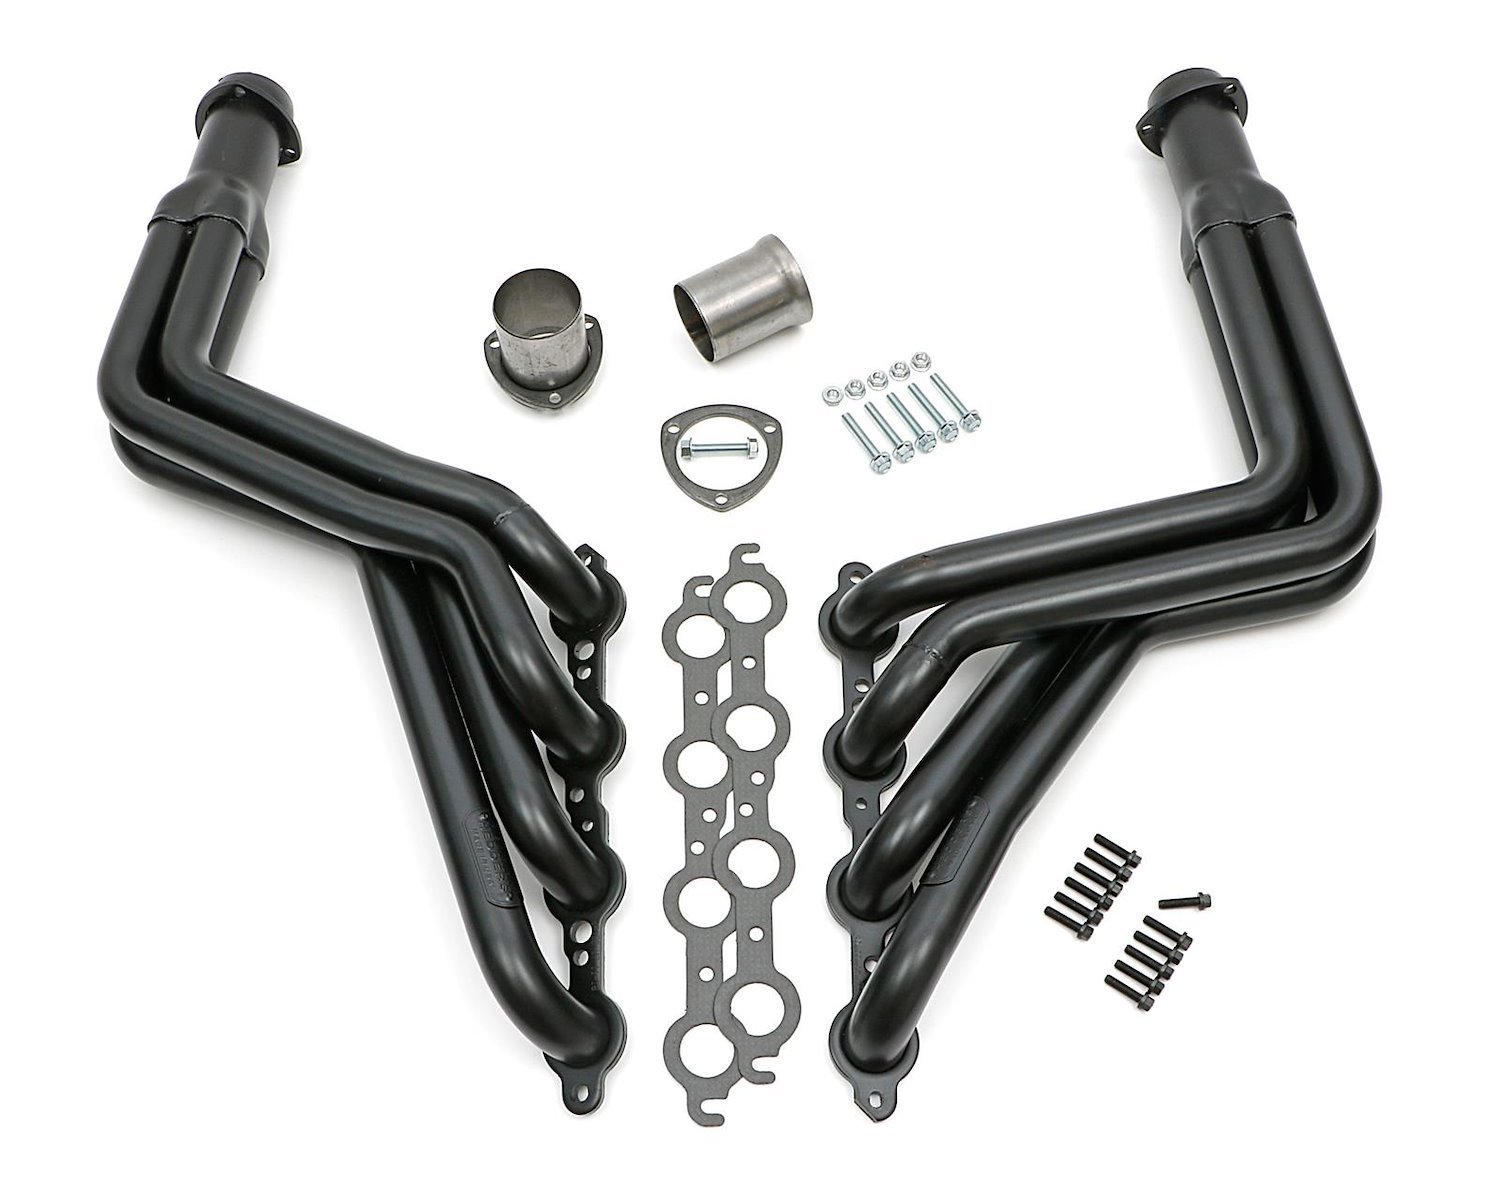 LS-Engine Swap Long-Tube Headers 1968-1972 Chevy Chevelle/El Camino - Uncoated Finish